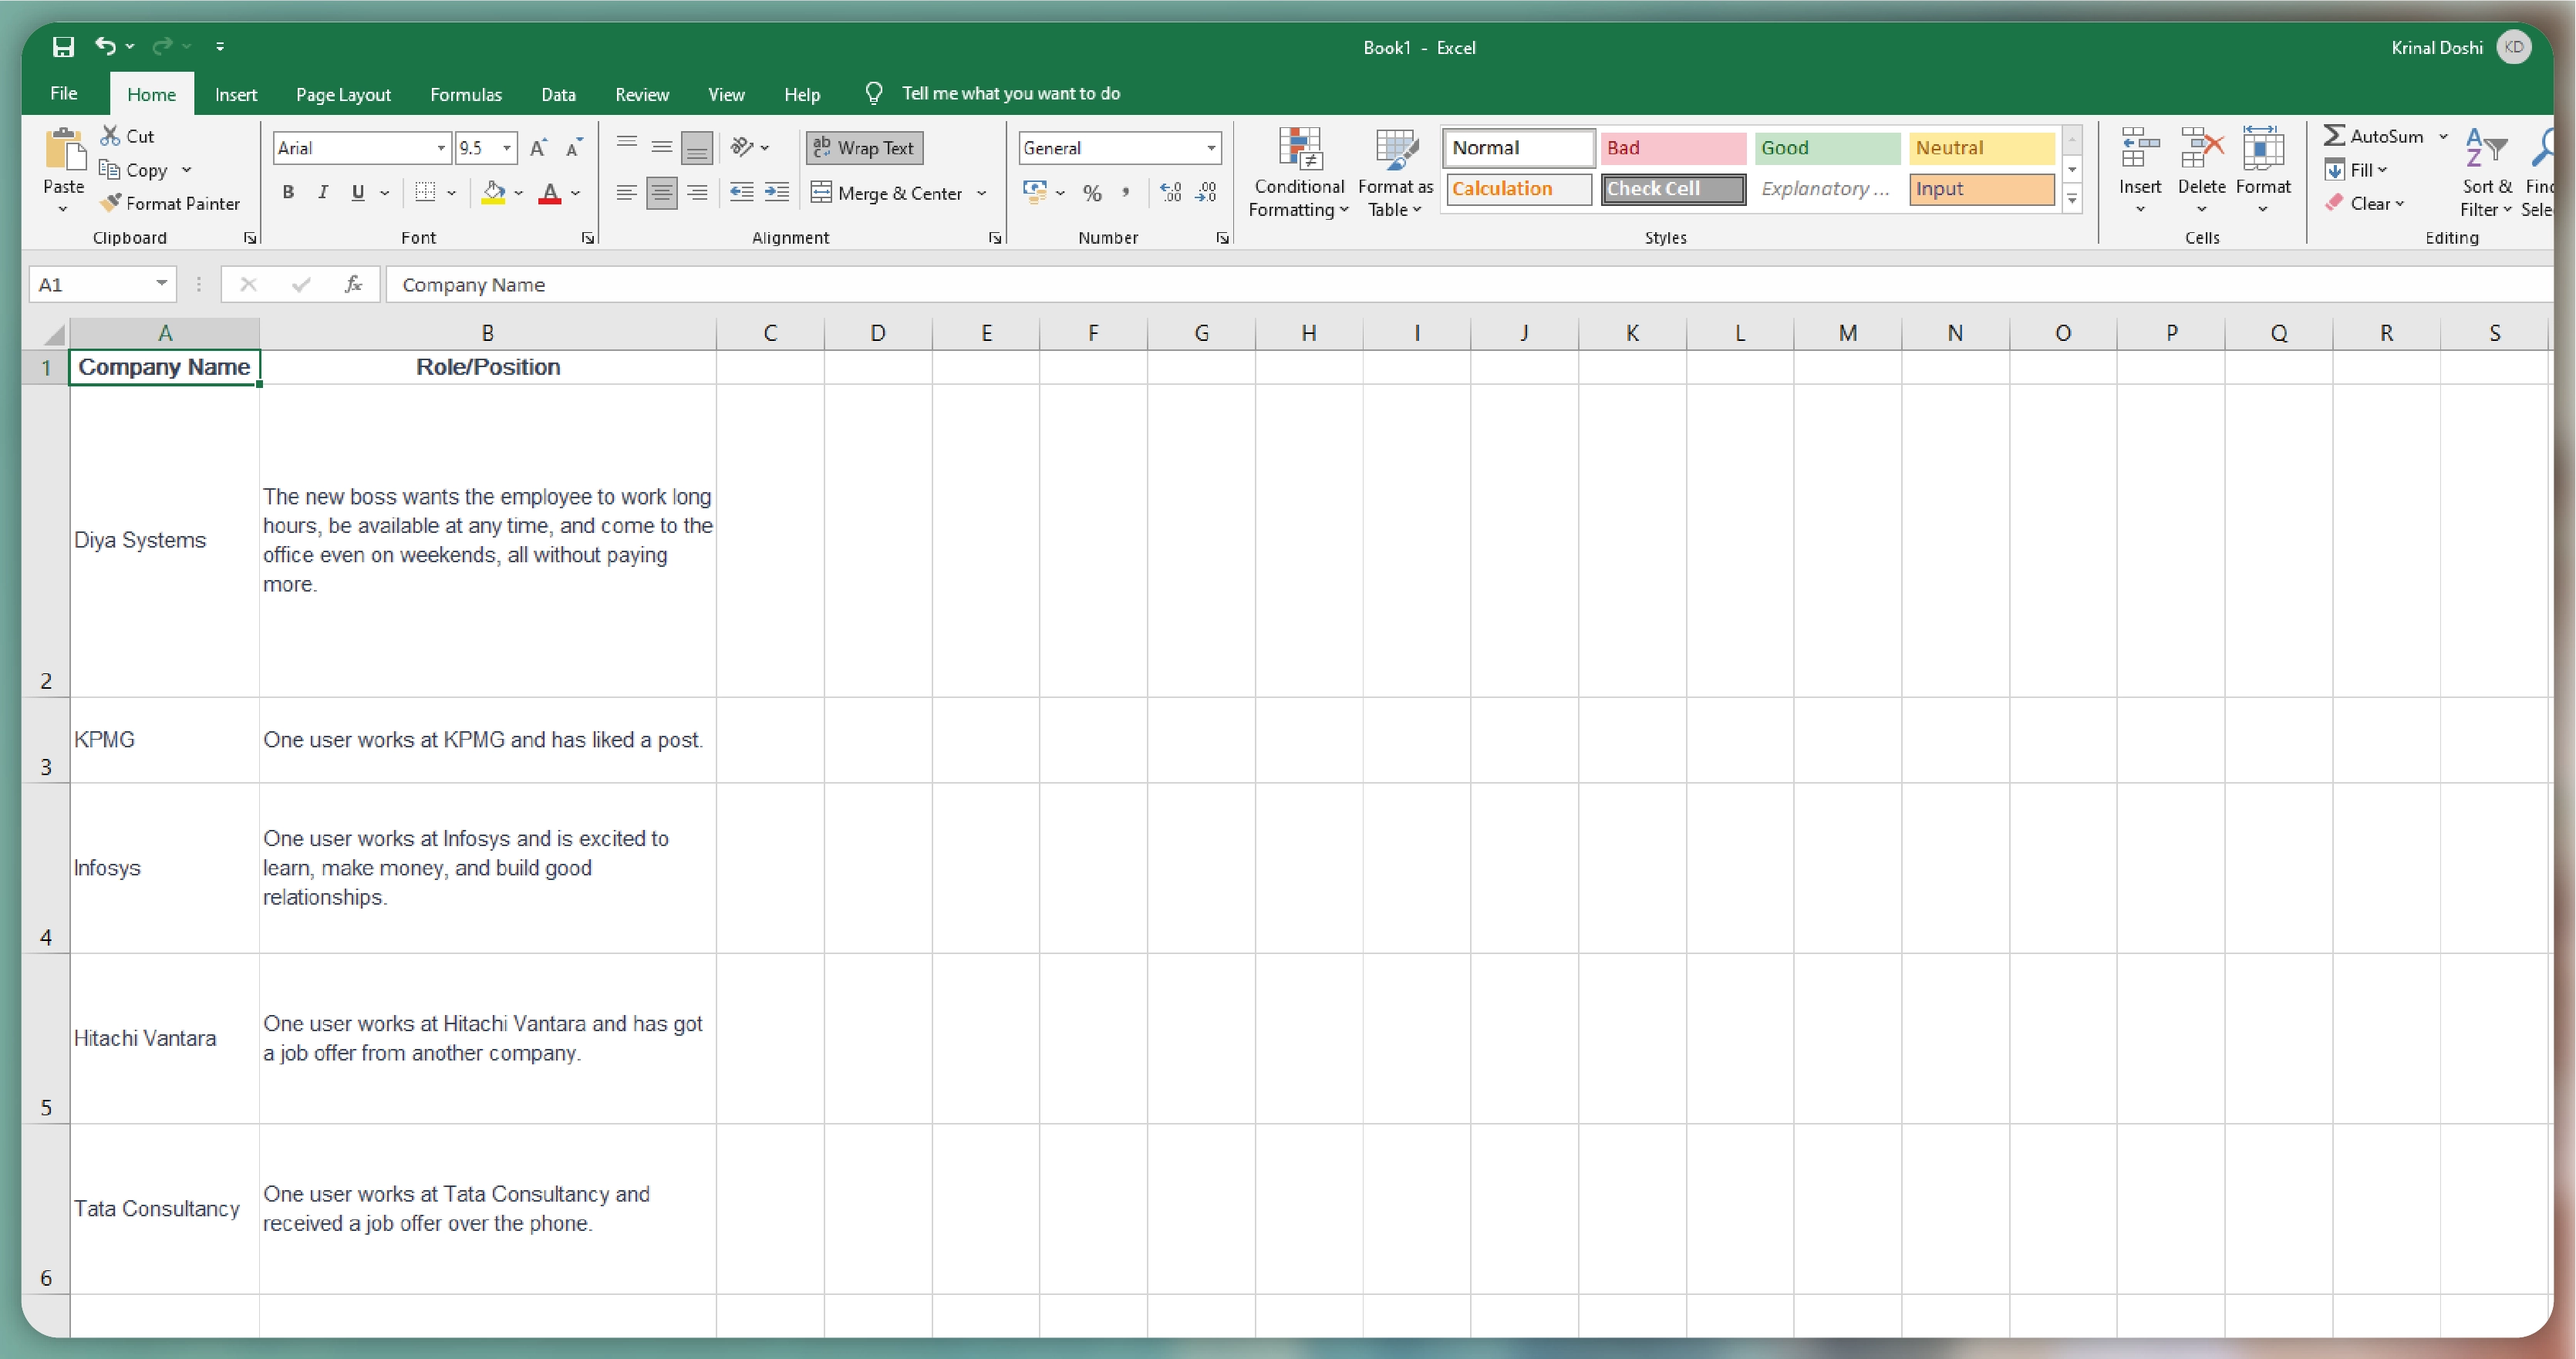 Download-the-Excel-file-containing-the-stored-results-01